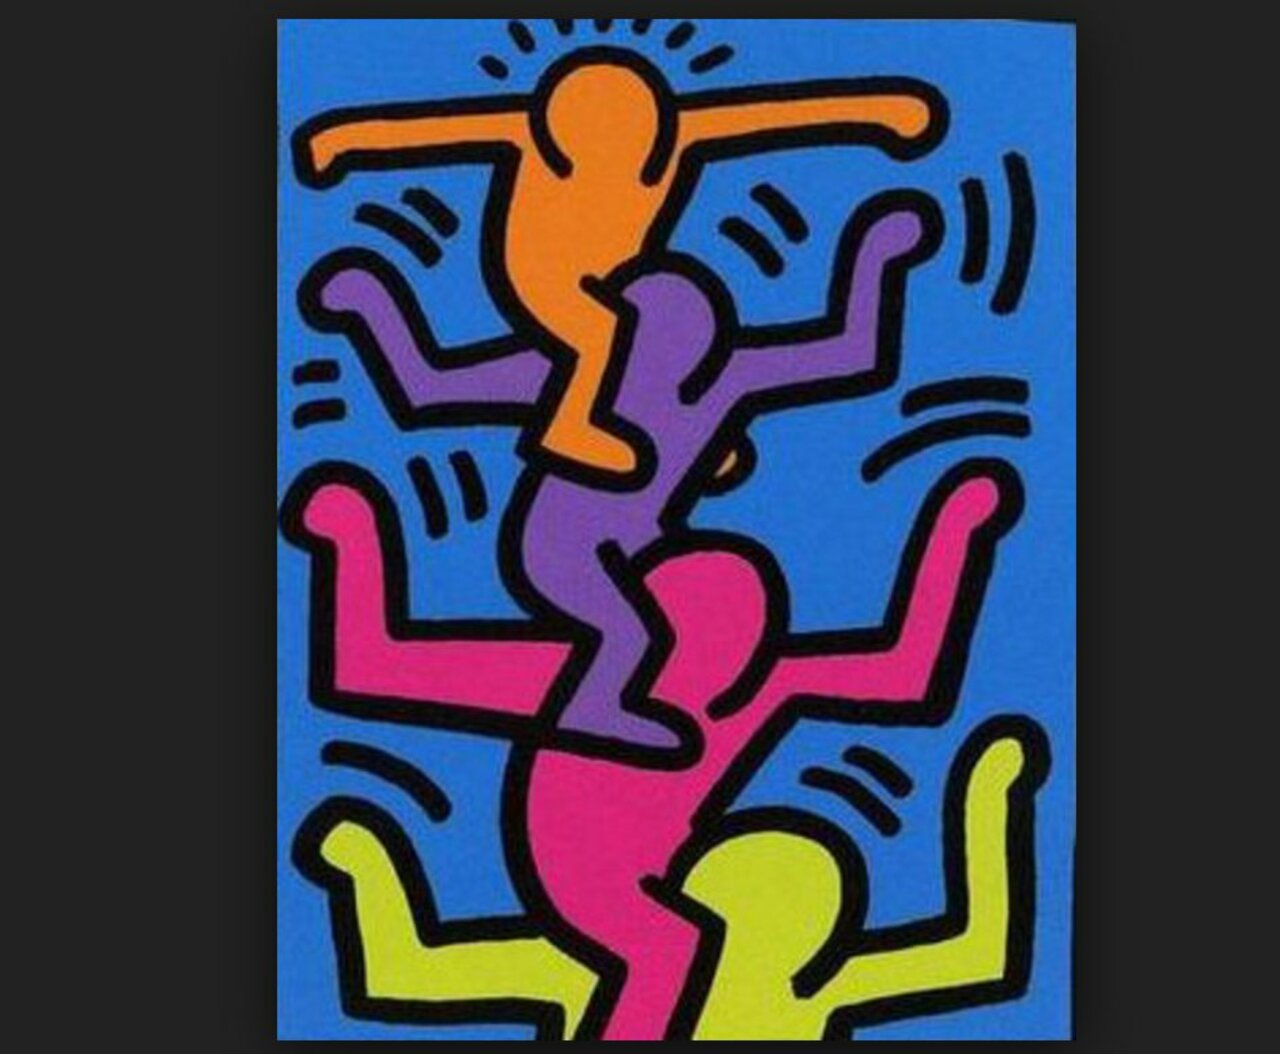 #art should B smthg that liberates the soul, provokes the imagination, encourages people to go furthr Keith Haring https://t.co/HsSNttNbGz